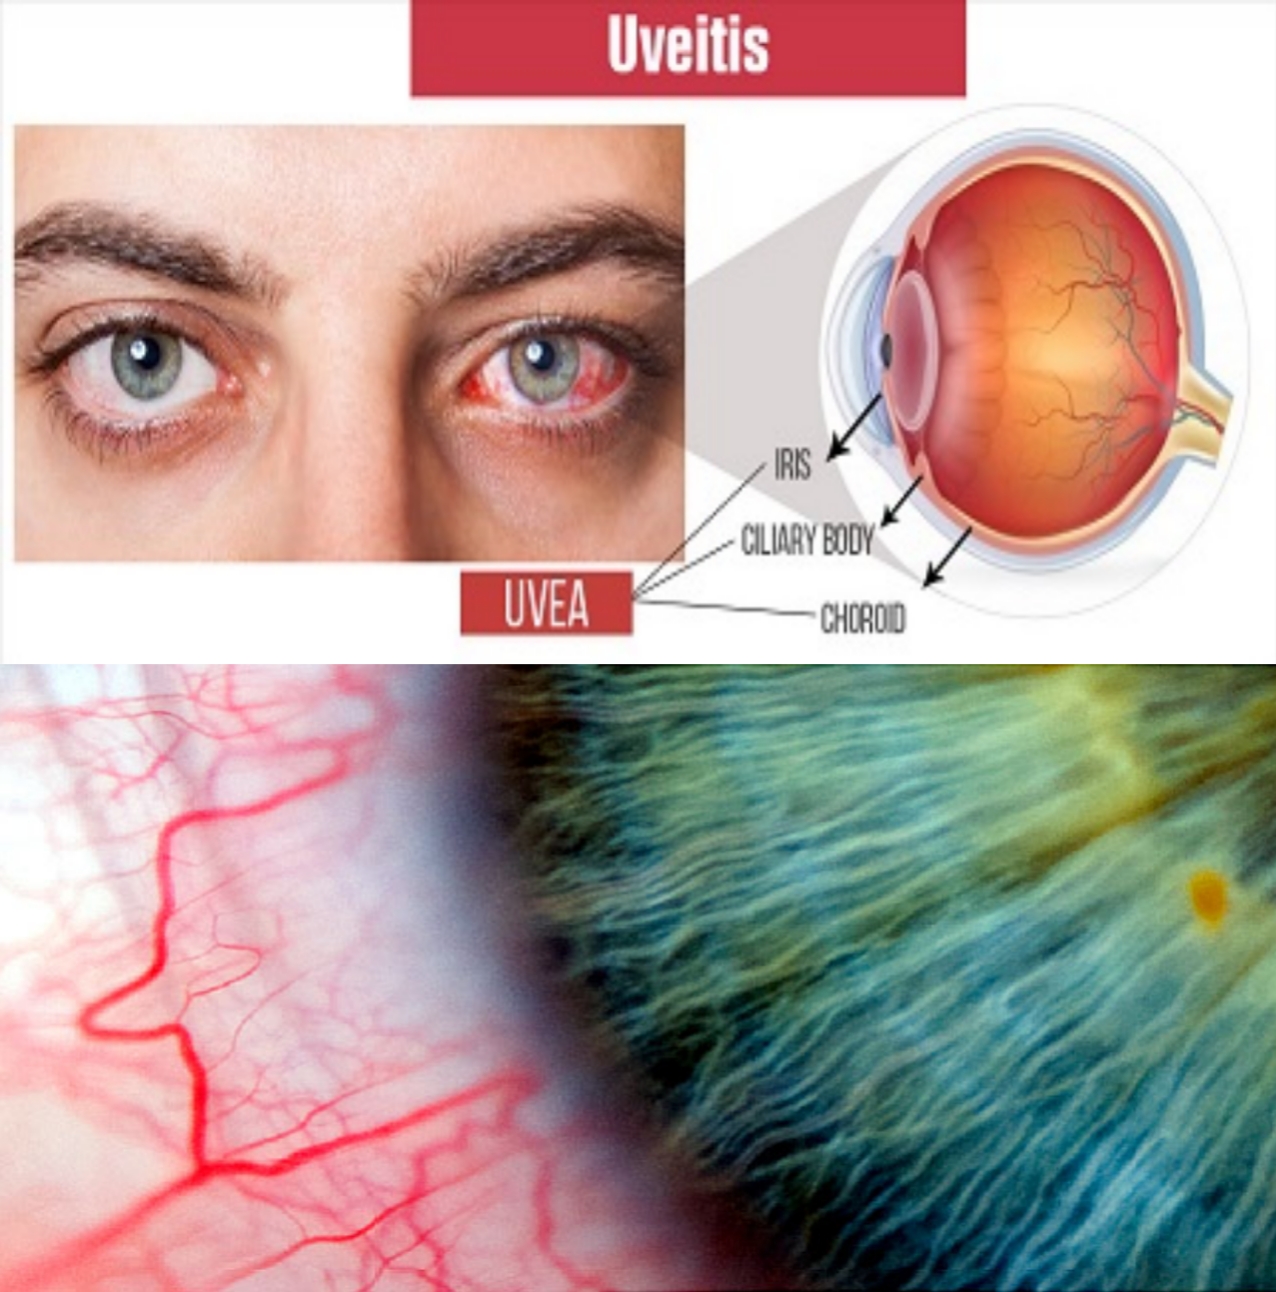 uveitis causes and treatment, Uveitis - Know the causes and Treatment